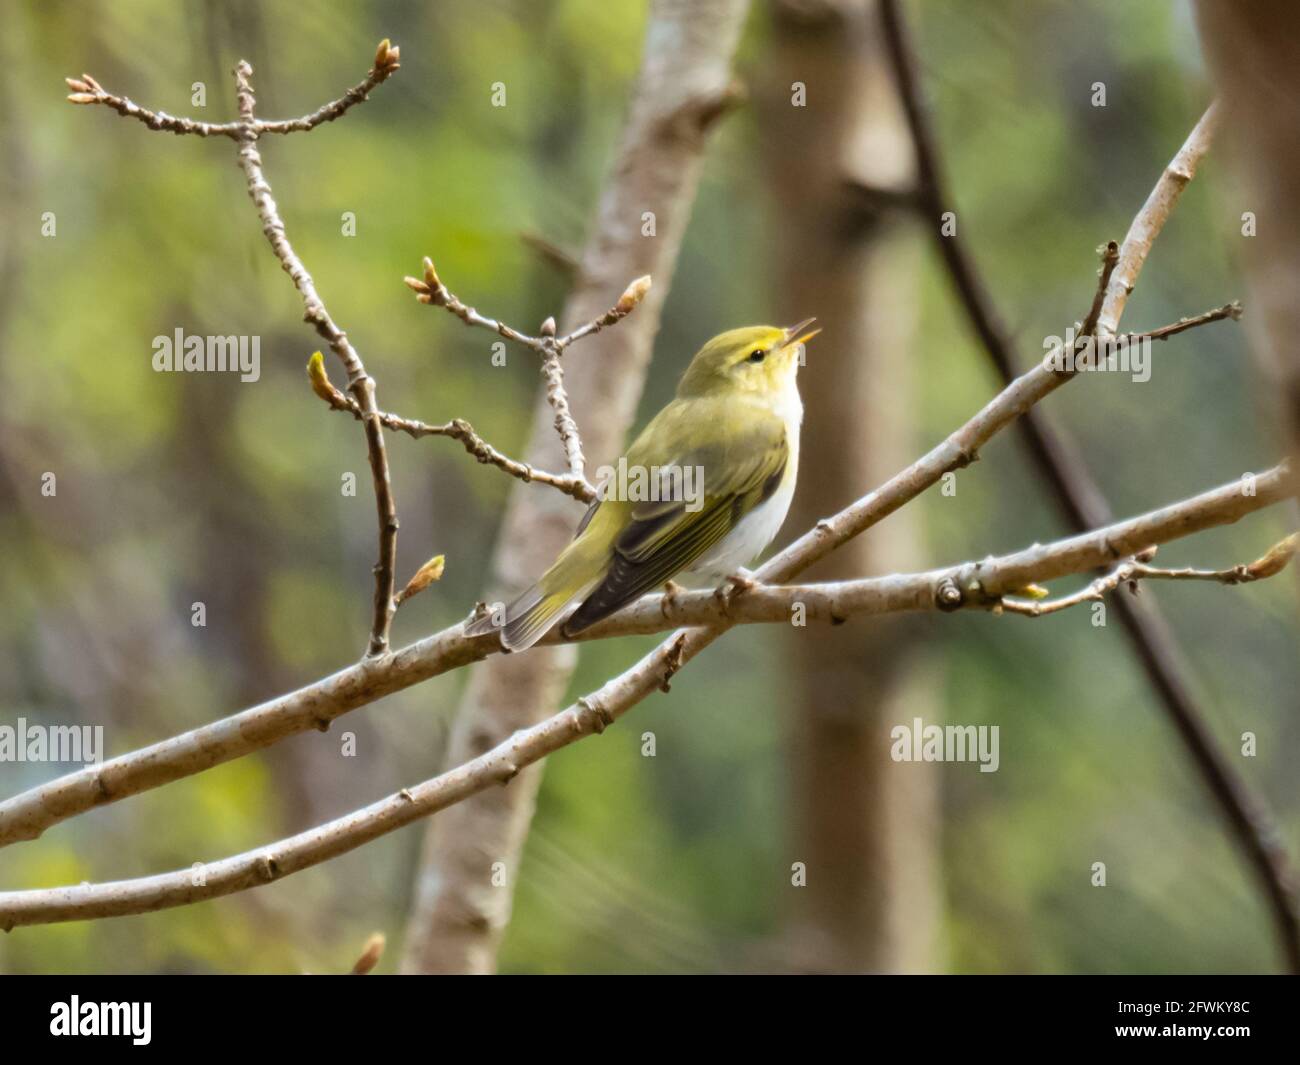 A Wood Warbler (Phylloscopus sibilatrix) perched in a tree. Stock Photo